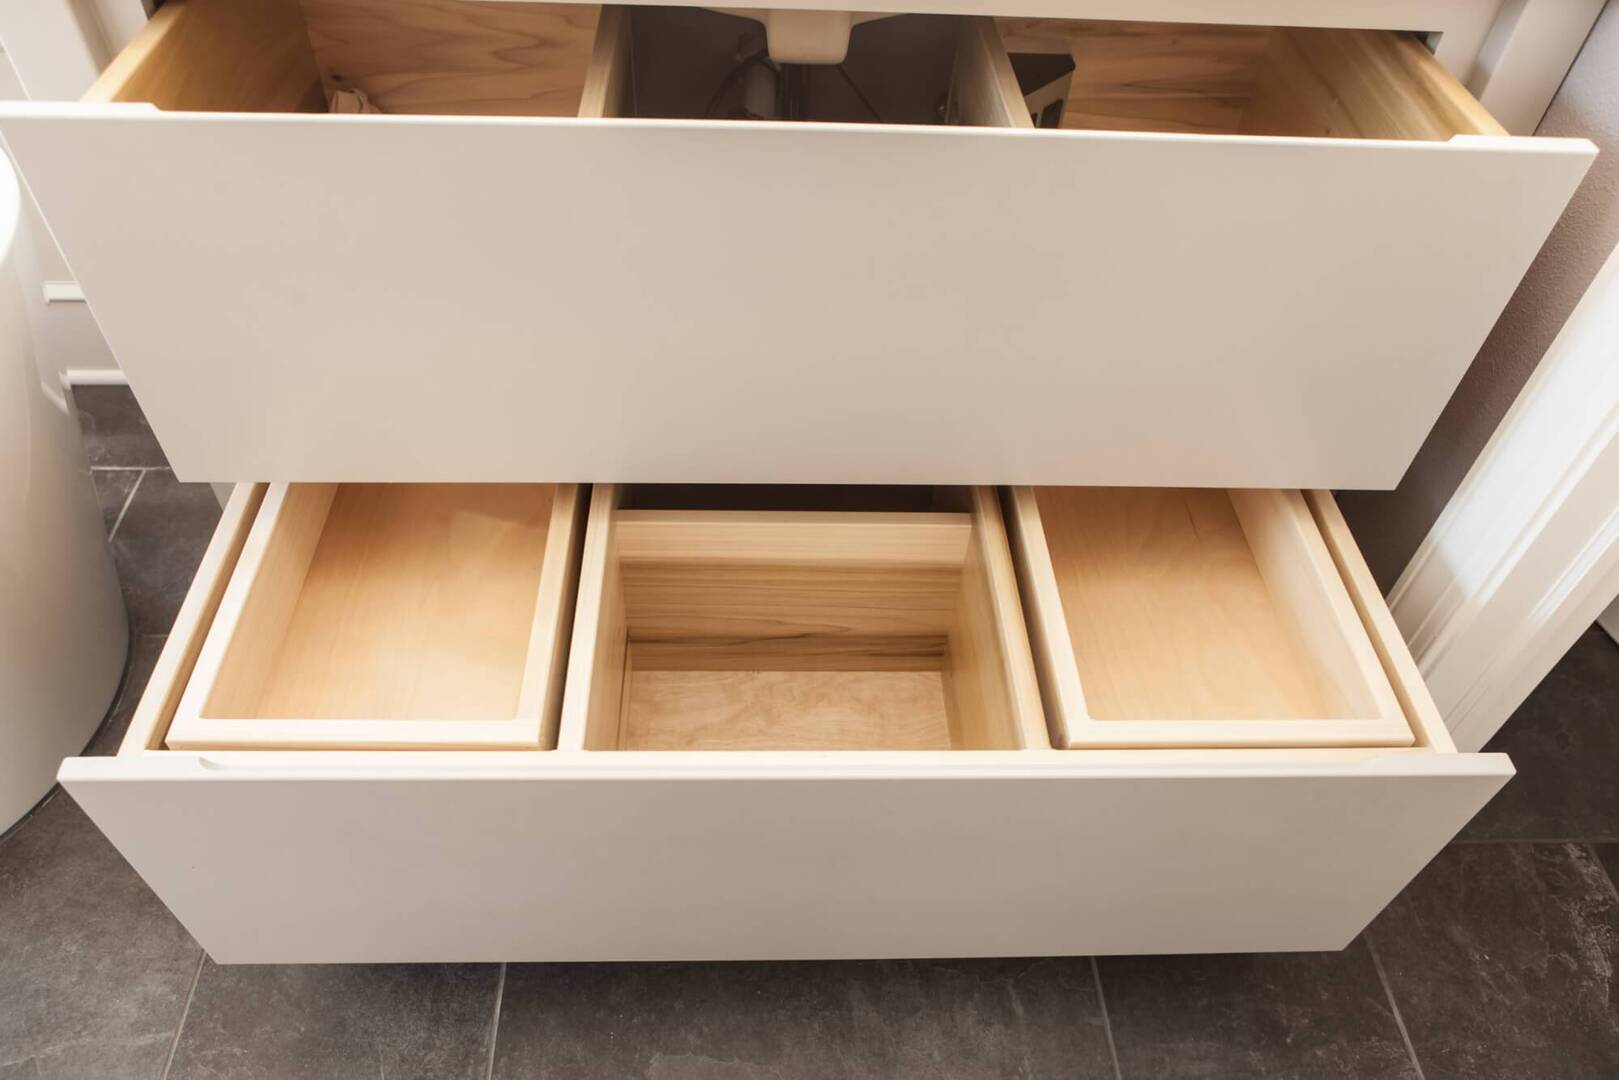 custom drawers pulled out on a master bathroom vanity